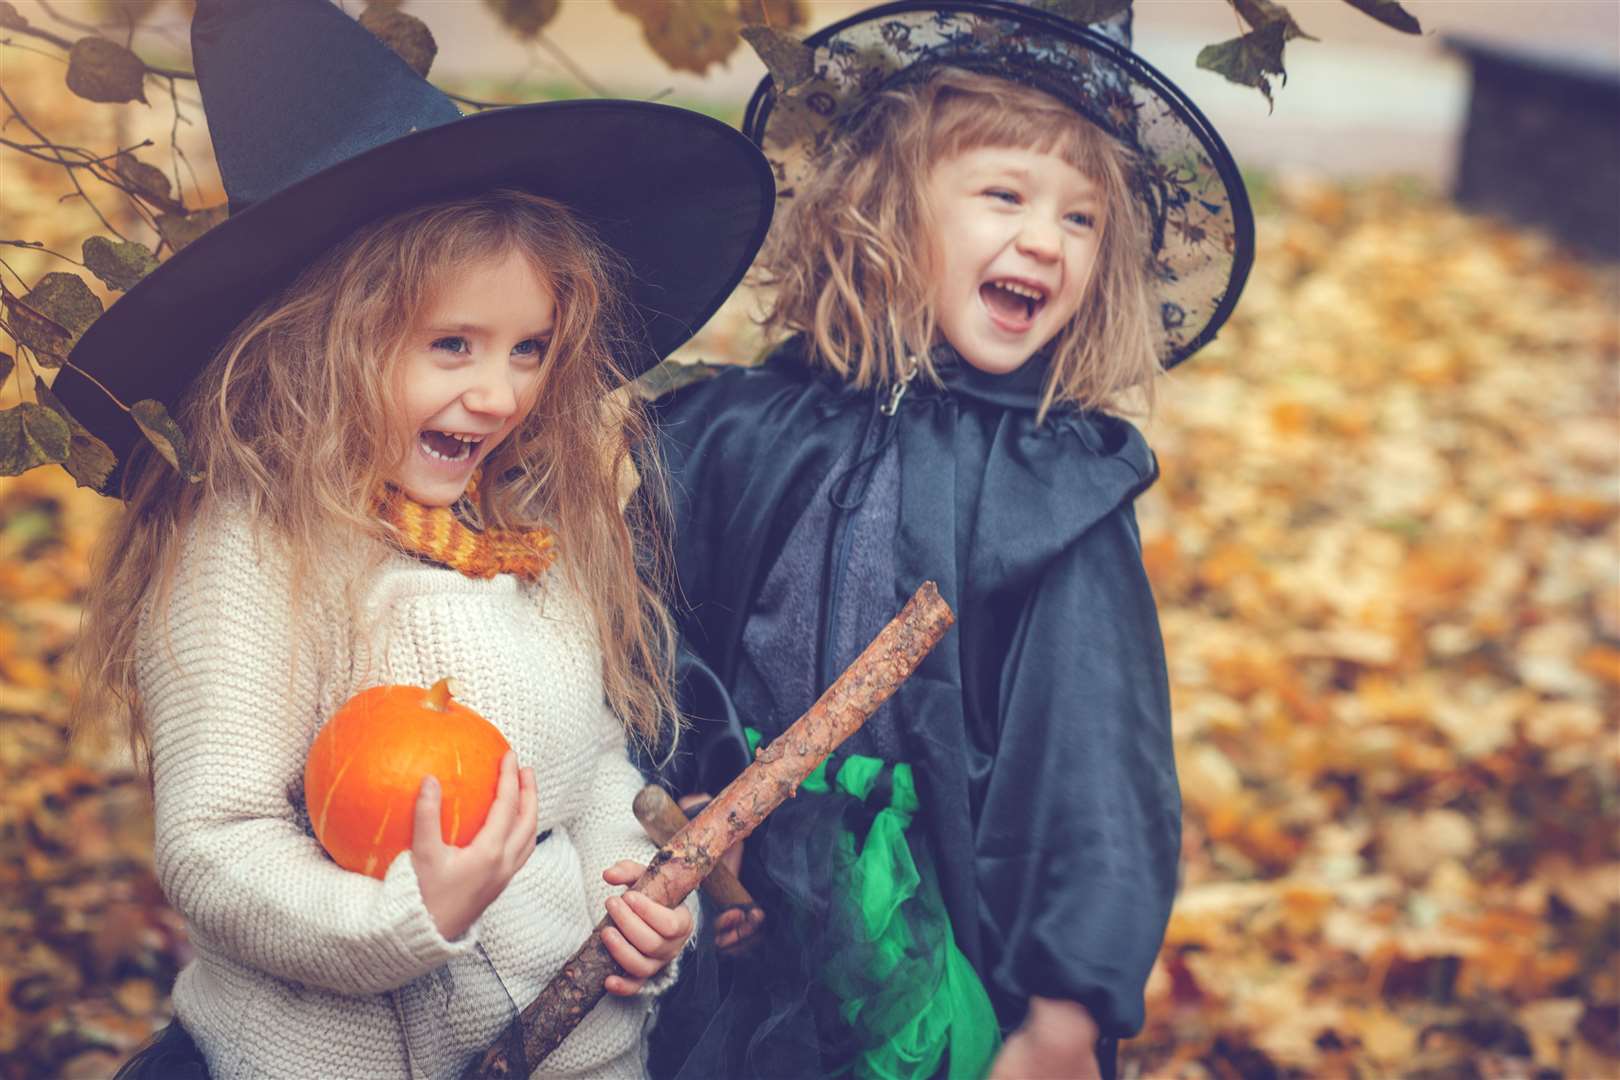 Dress up in your best creepy costume and enjoy activities around the county. Picture: iStock